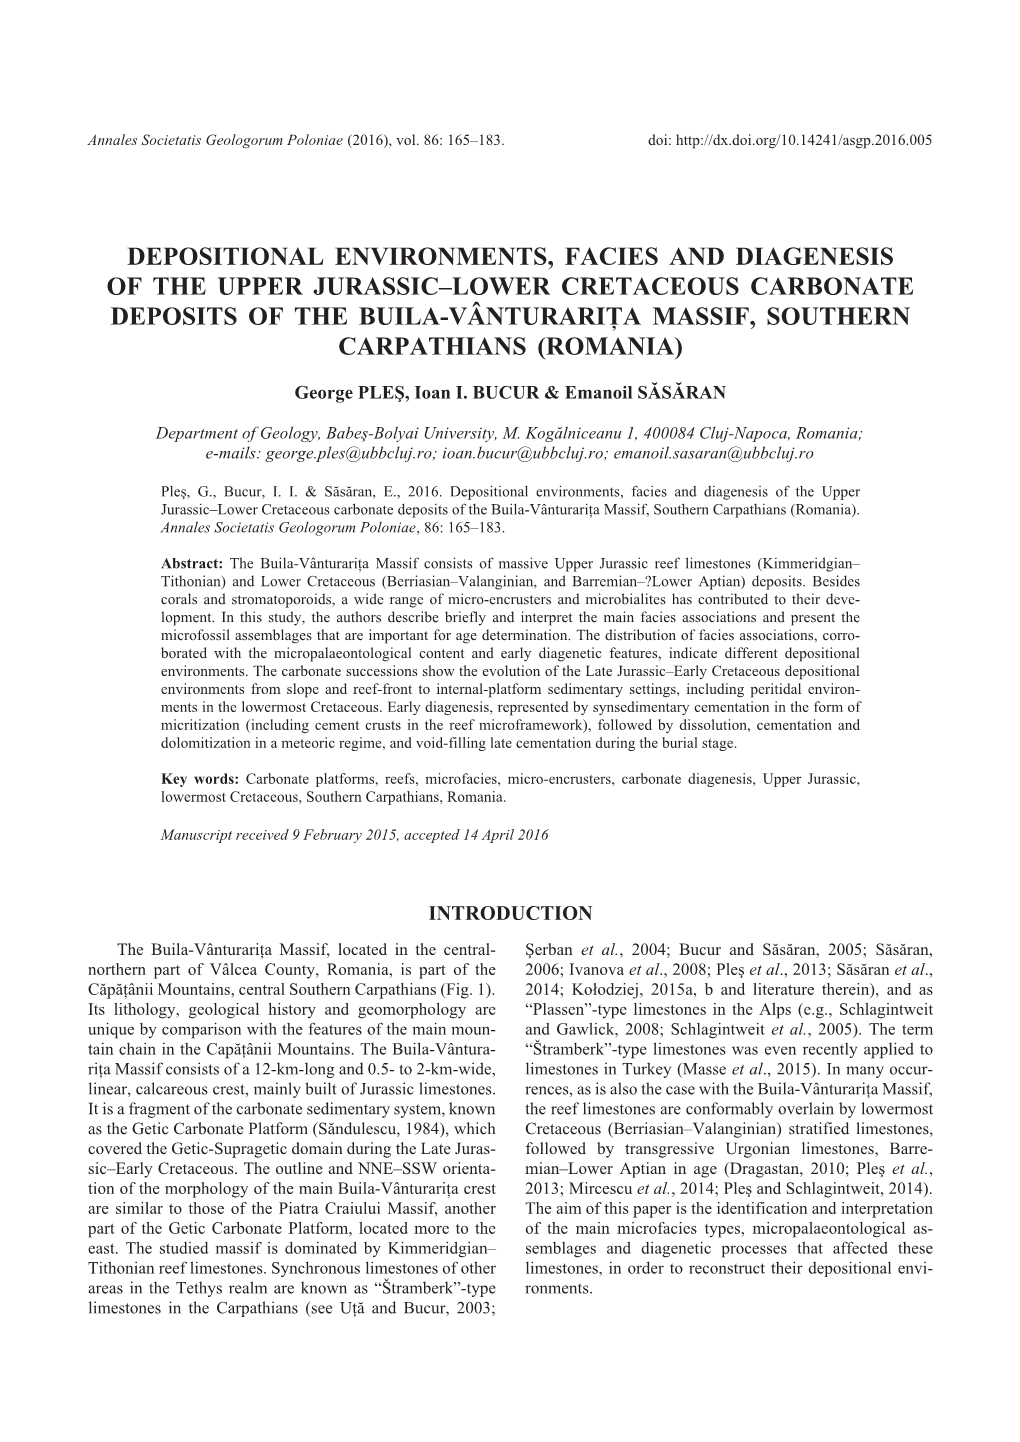 Depositional Environments, Facies and Diagenesis of The